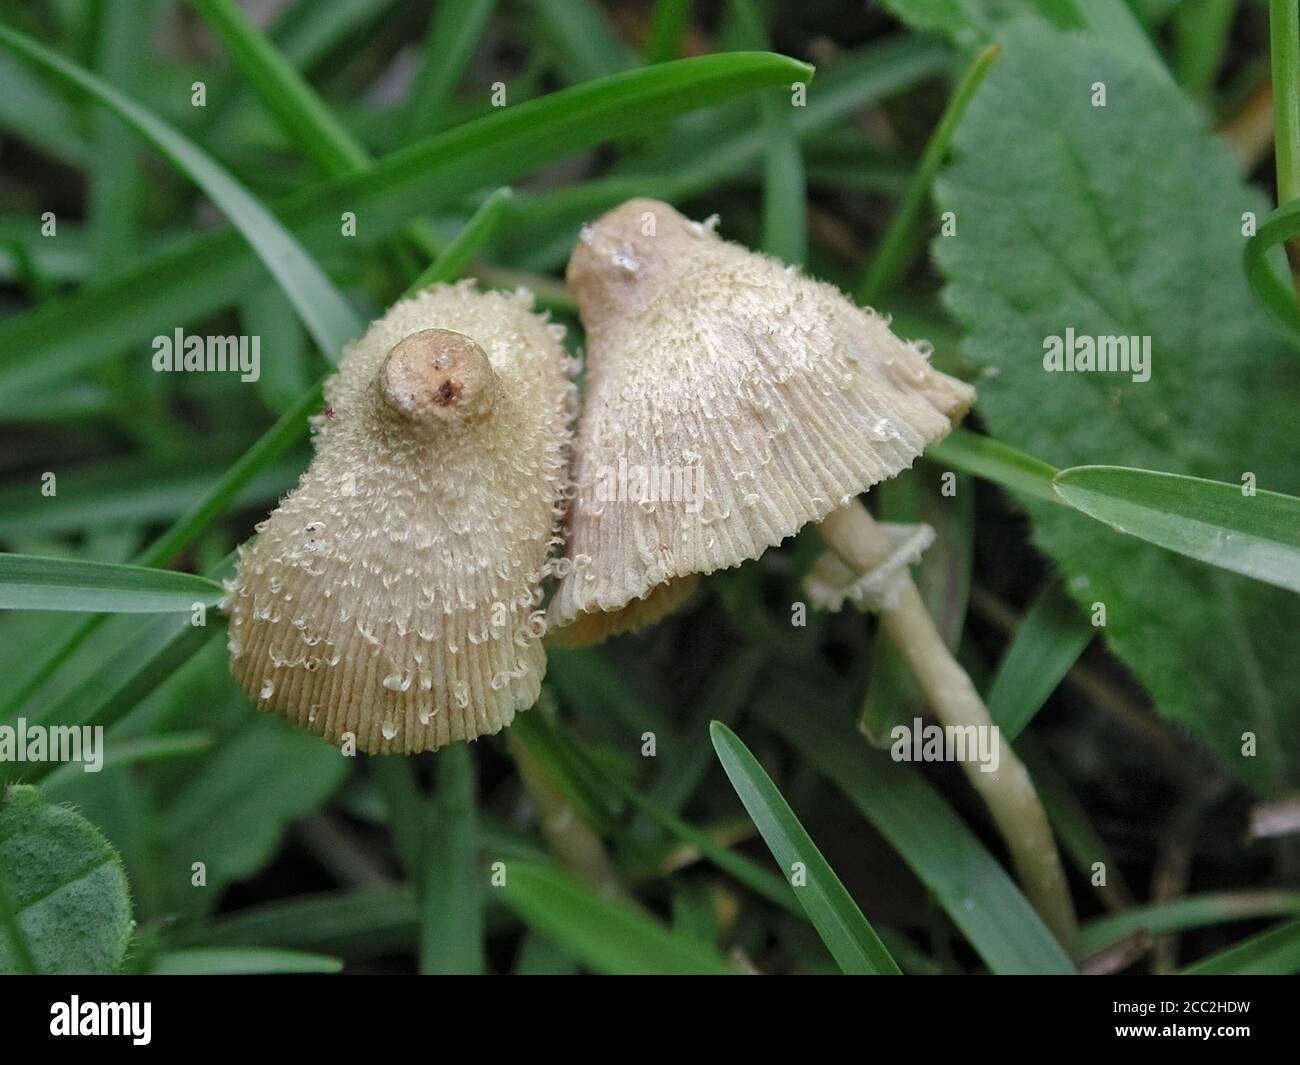 Mushrooms are a form of fungi found in natural settings around the world.; This one is found in a forested area of North Central Florida. Stock Photo